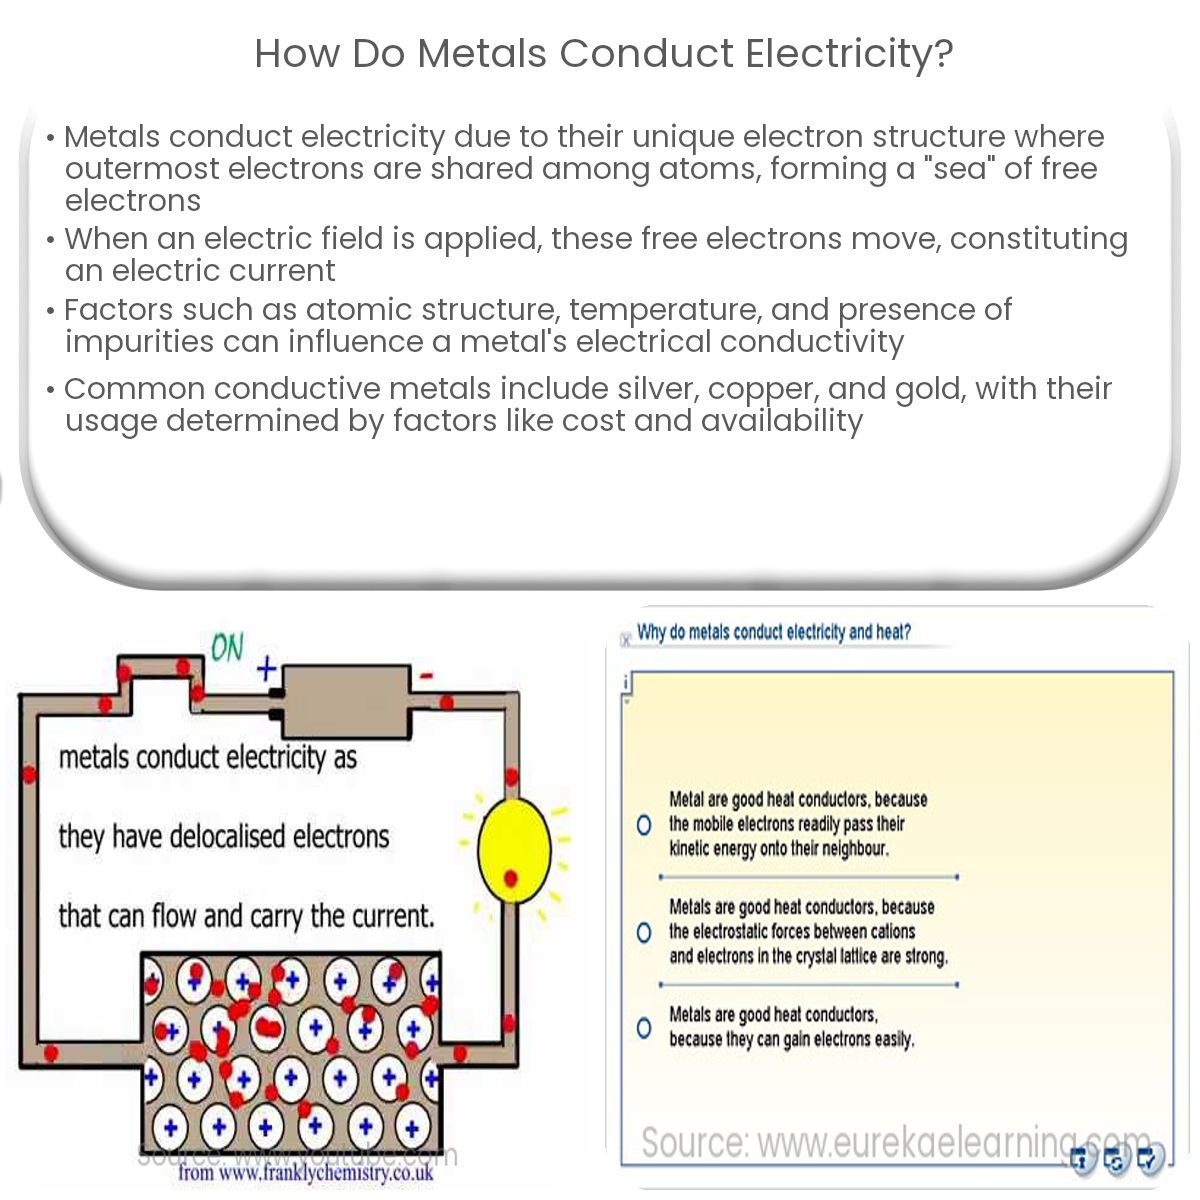 Which Metal Best Conducts Electricity?